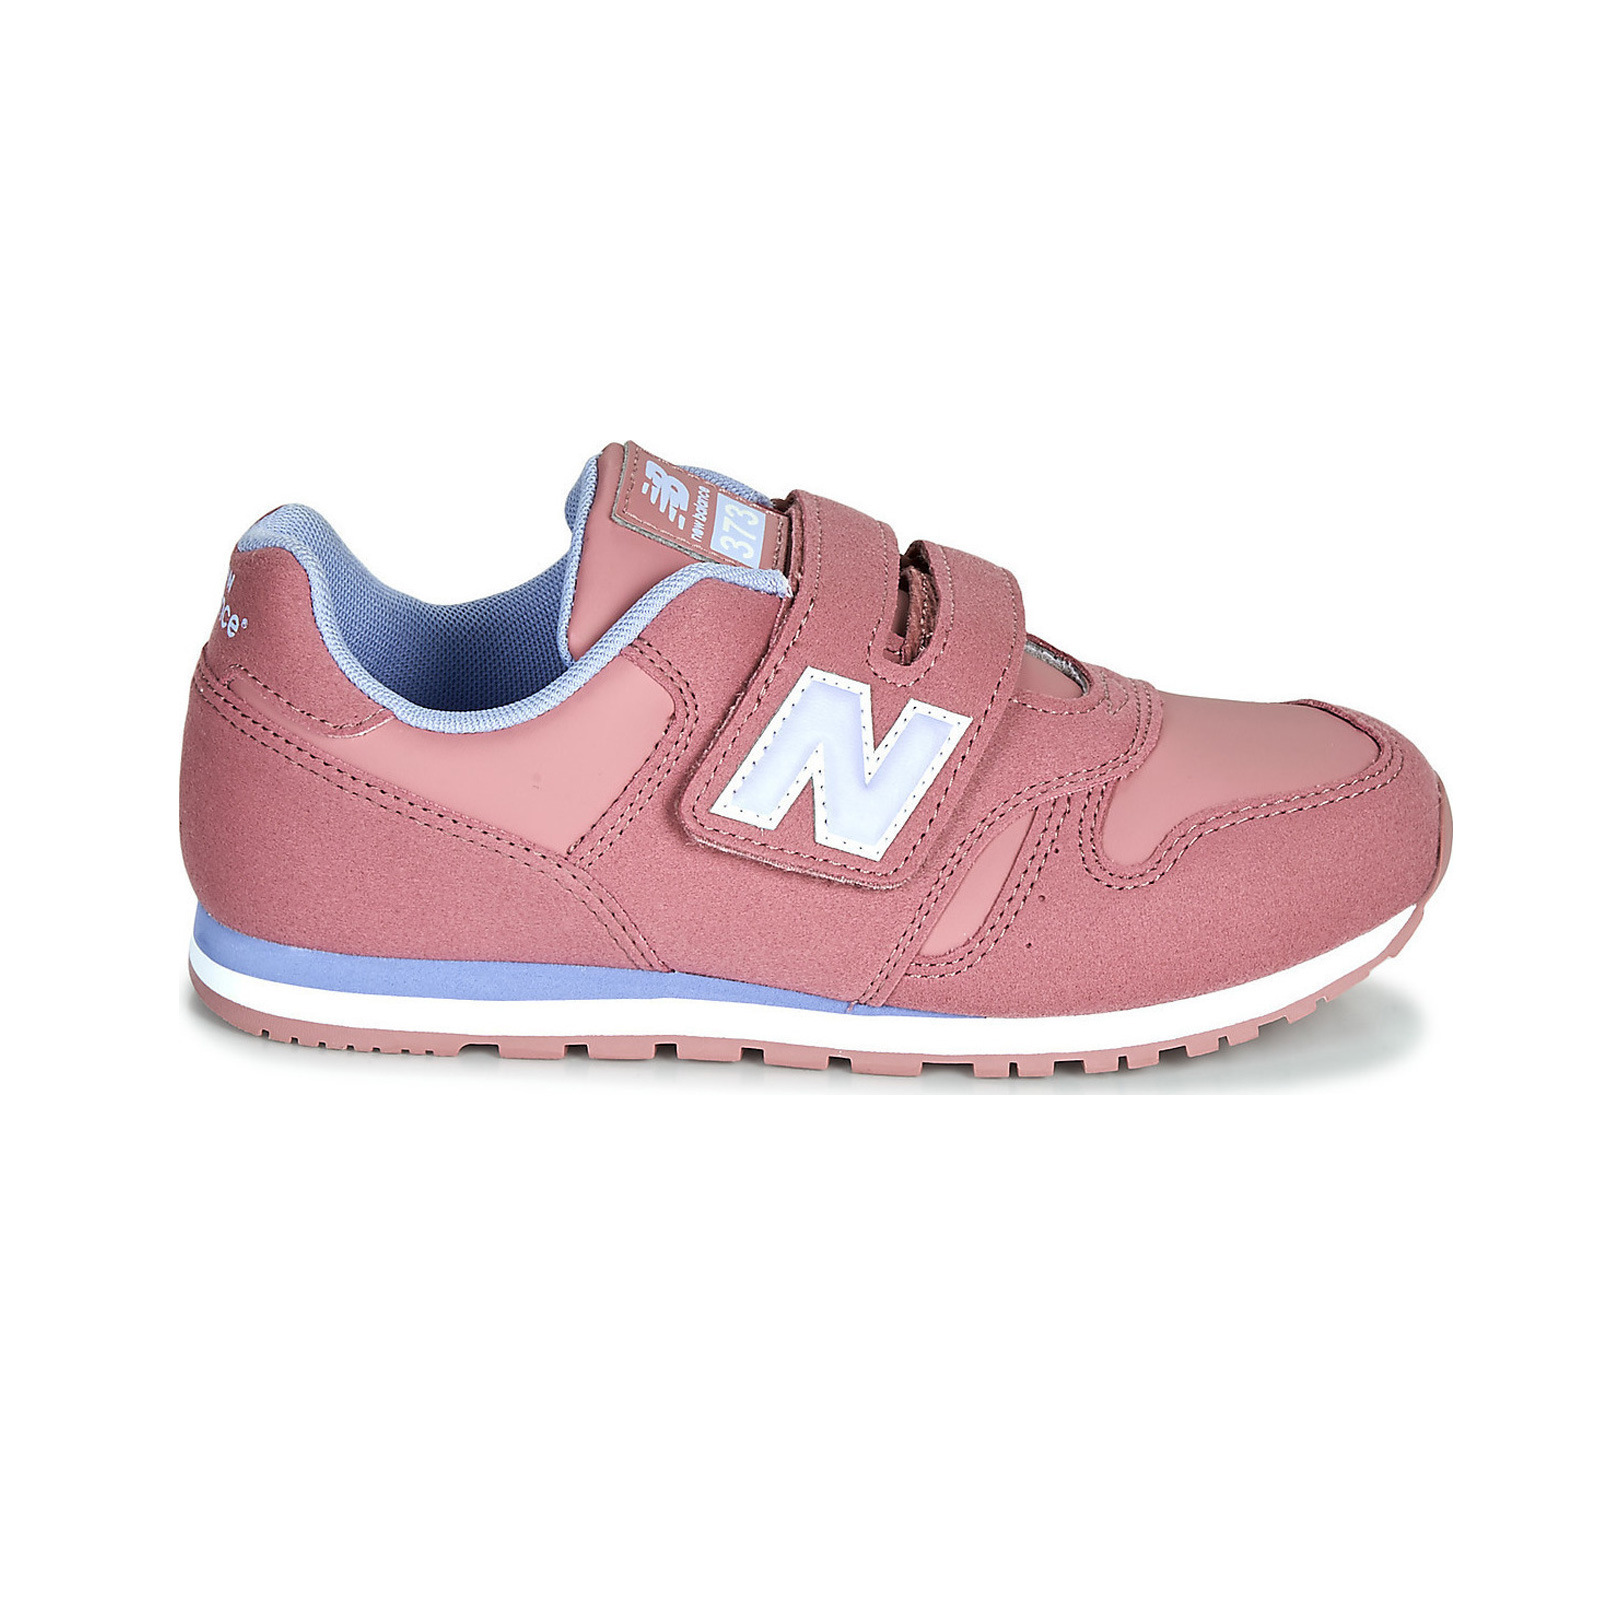 New balance ls - 373 YOUTH - ΠΑΠΟΥΤΣΙ CLASSICS YOUTH - PINK/PURPLE (655) Παιδικά > Παπούτσια > Sneaker > Παπούτσι Low Cut